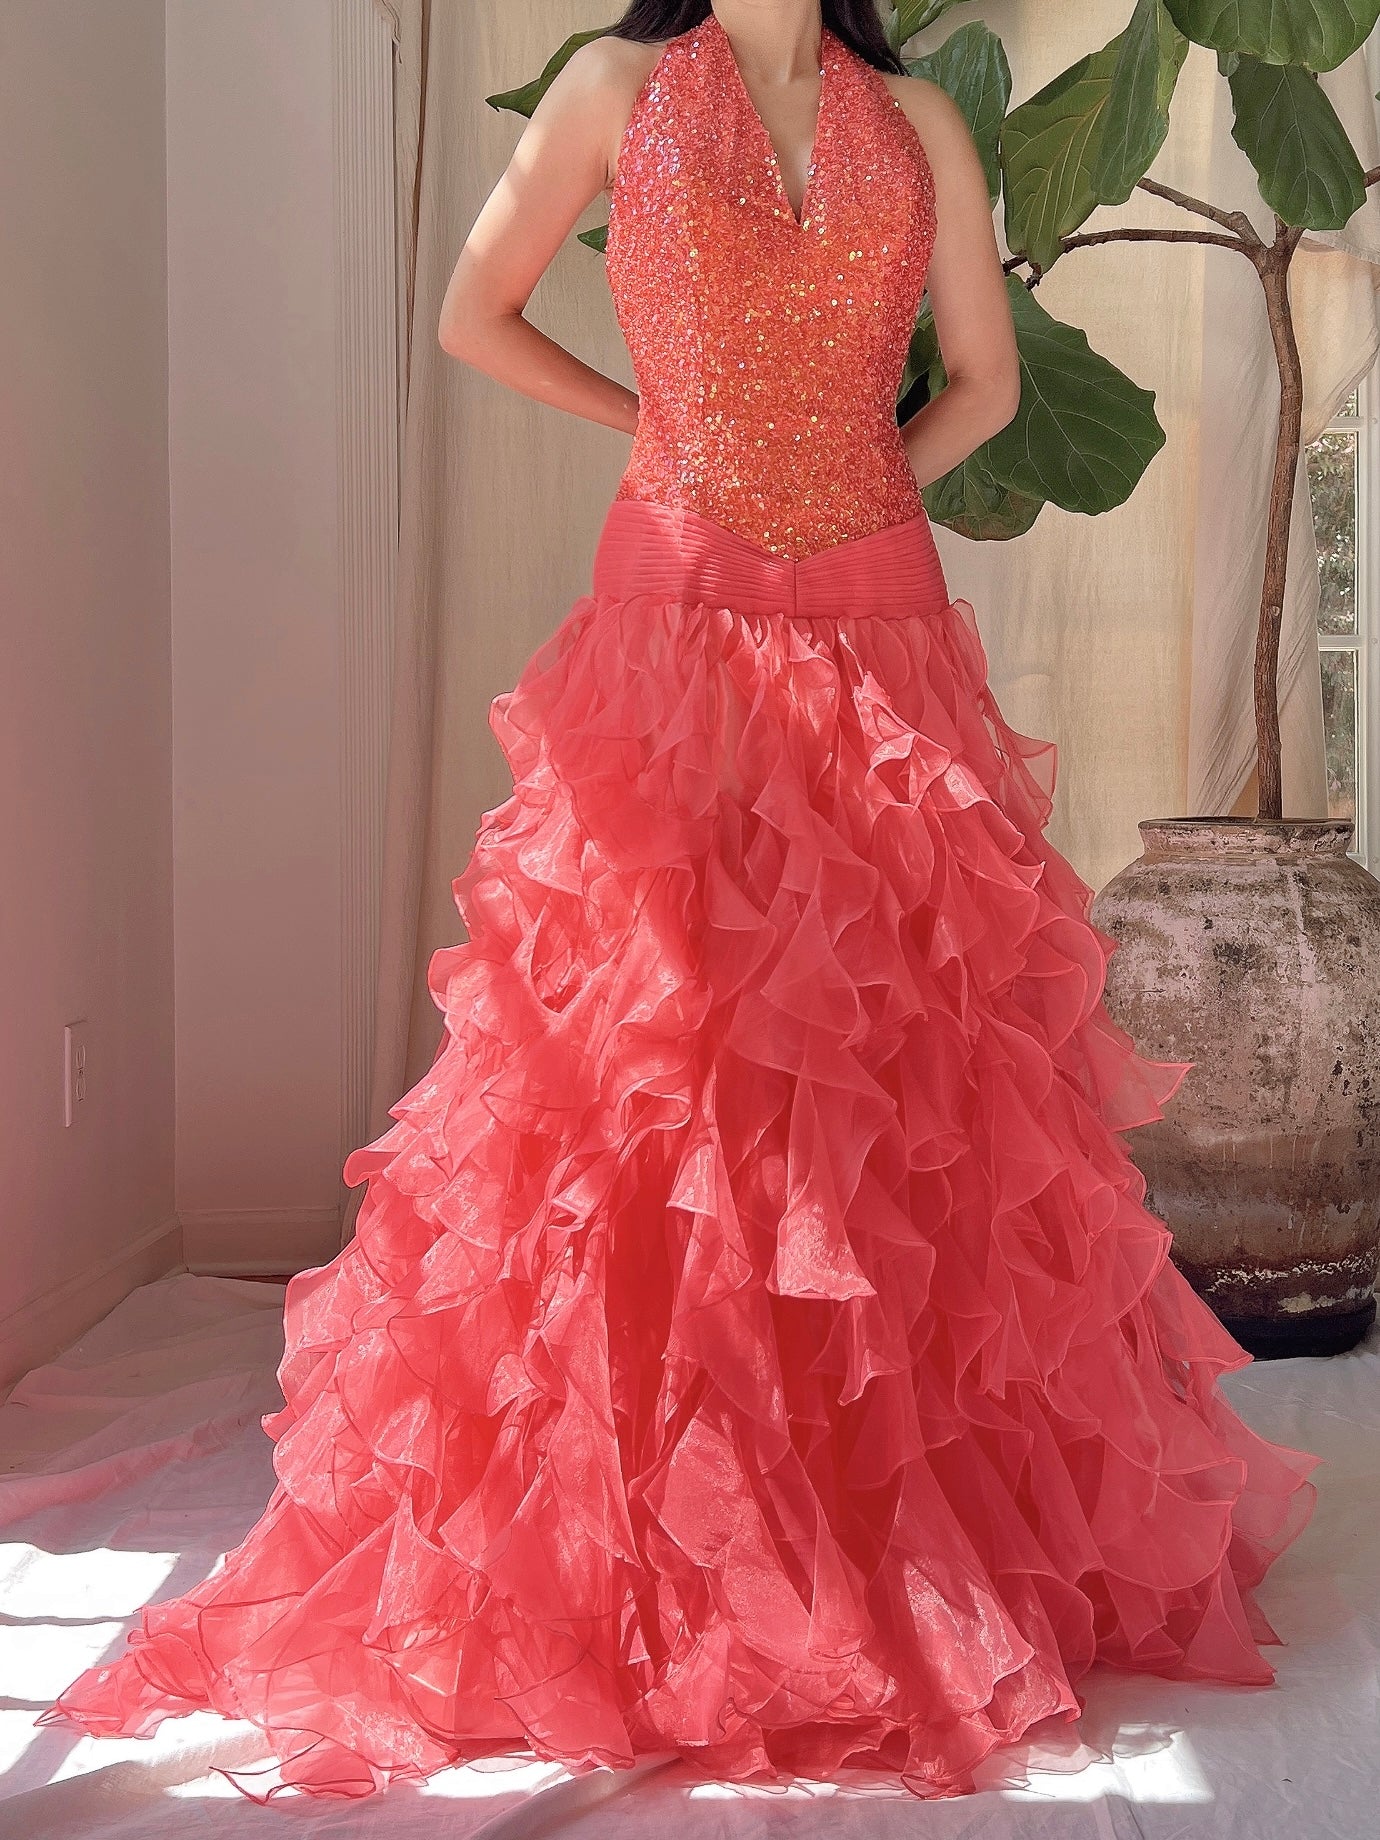 Vintage Coral Sequins Ruffle Skirt Gown - S